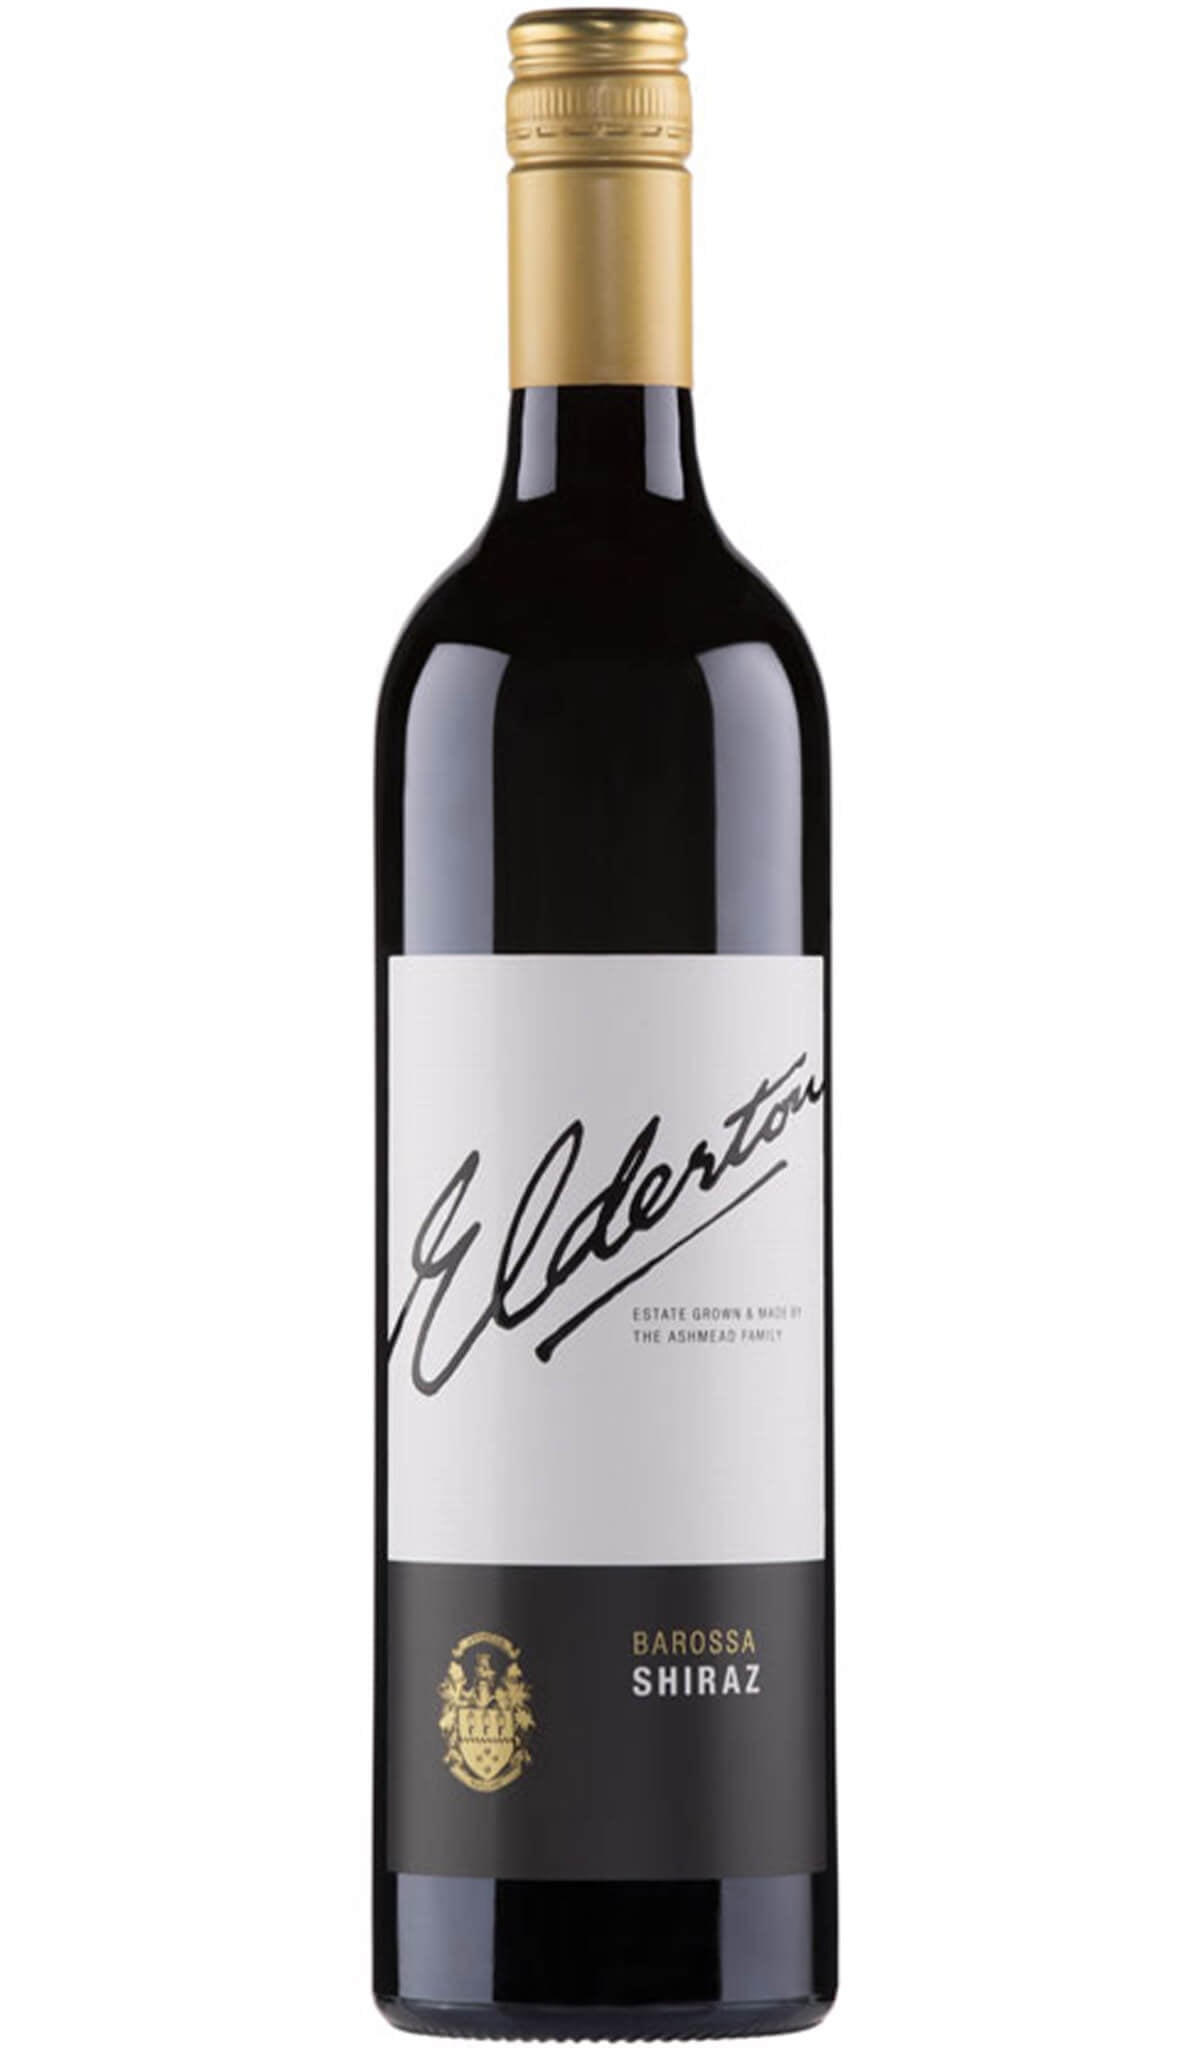 Find out more or buy Elderton Barossa Valley Shiraz 2021 online at Wine Sellers Direct - Australia’s independent liquor specialists.